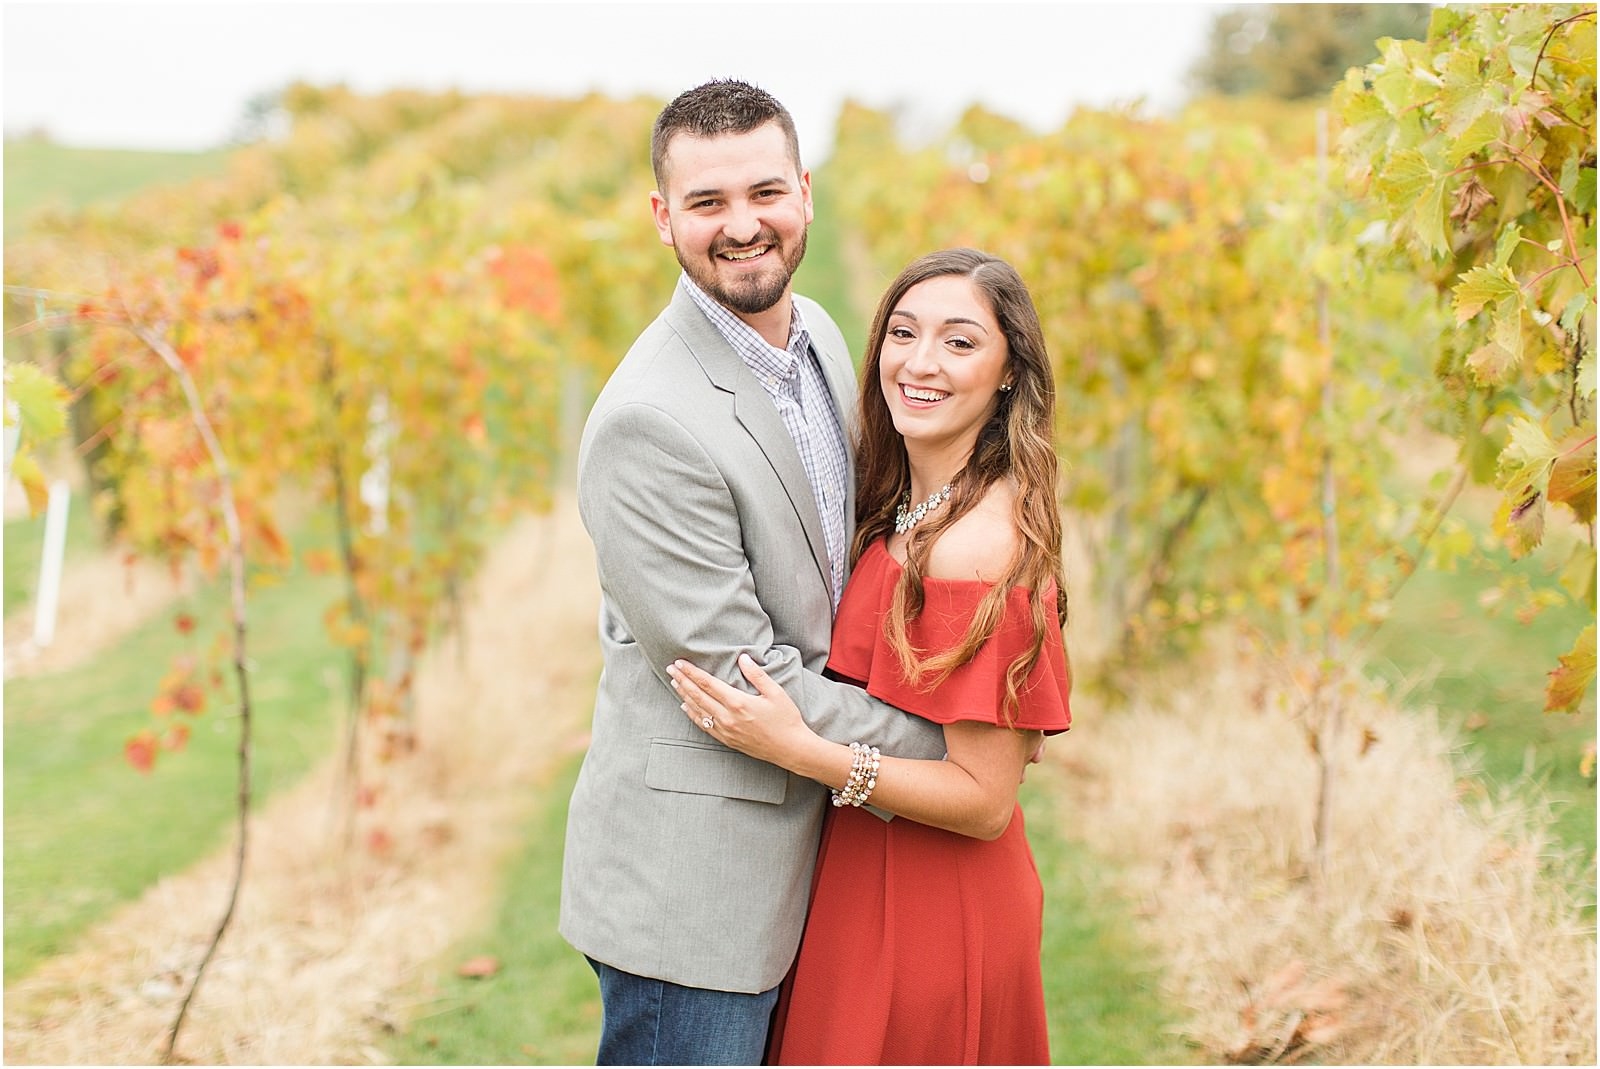 A Fall Oliver Winery Engagement Session | Sally and Andrew | Bret and Brandie Photography 0020.jpg